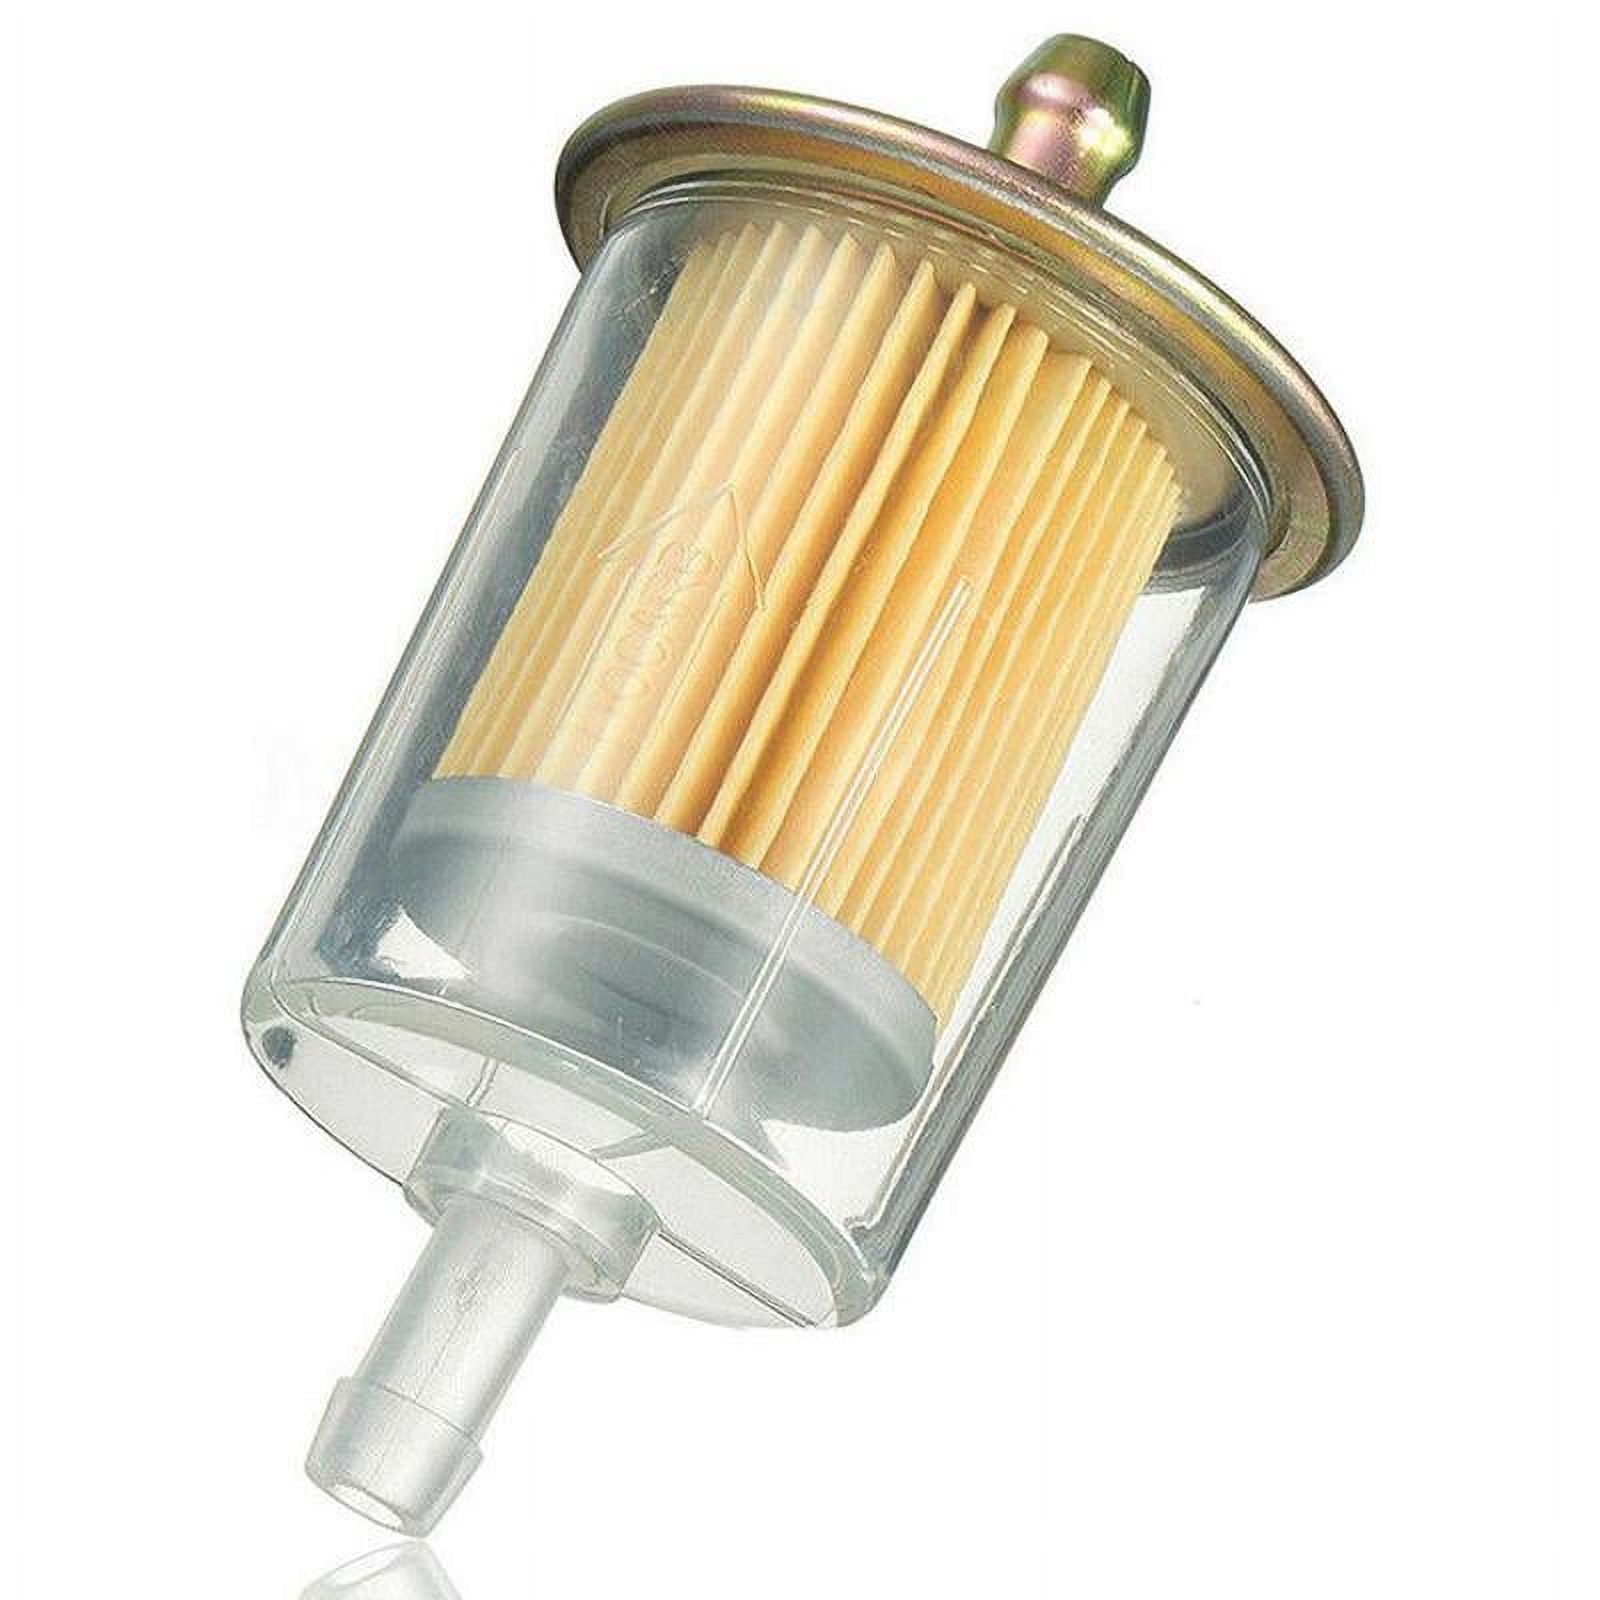  Metal 3/8 Universal Fuel Filter Replaces # G15M - 5 Pack :  Automotive